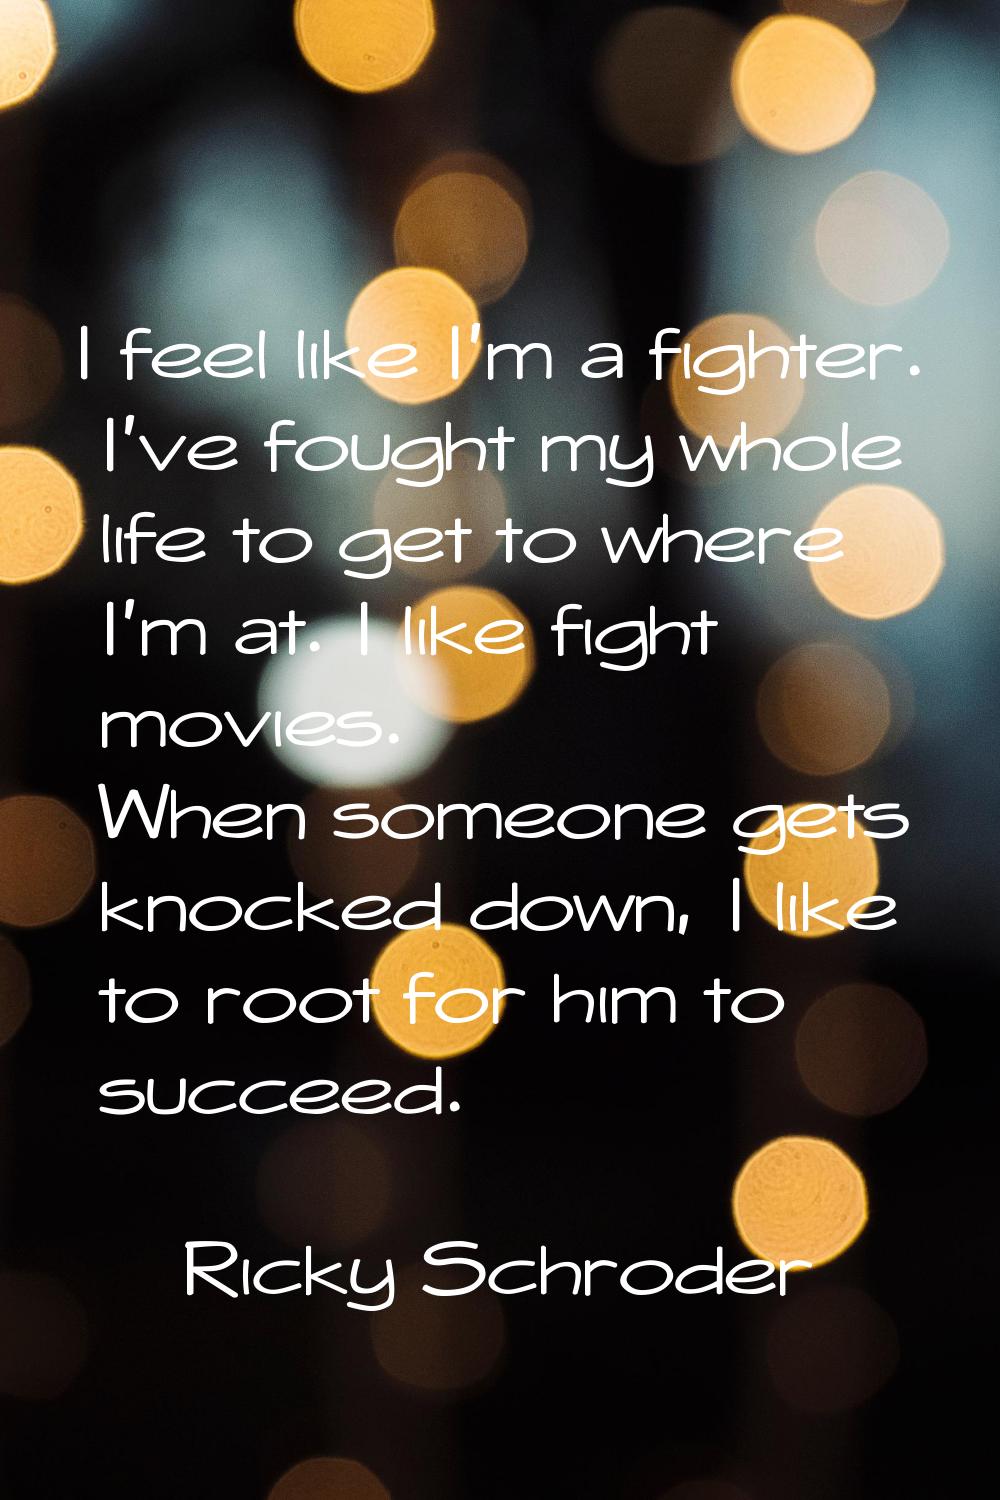 I feel like I'm a fighter. I've fought my whole life to get to where I'm at. I like fight movies. W